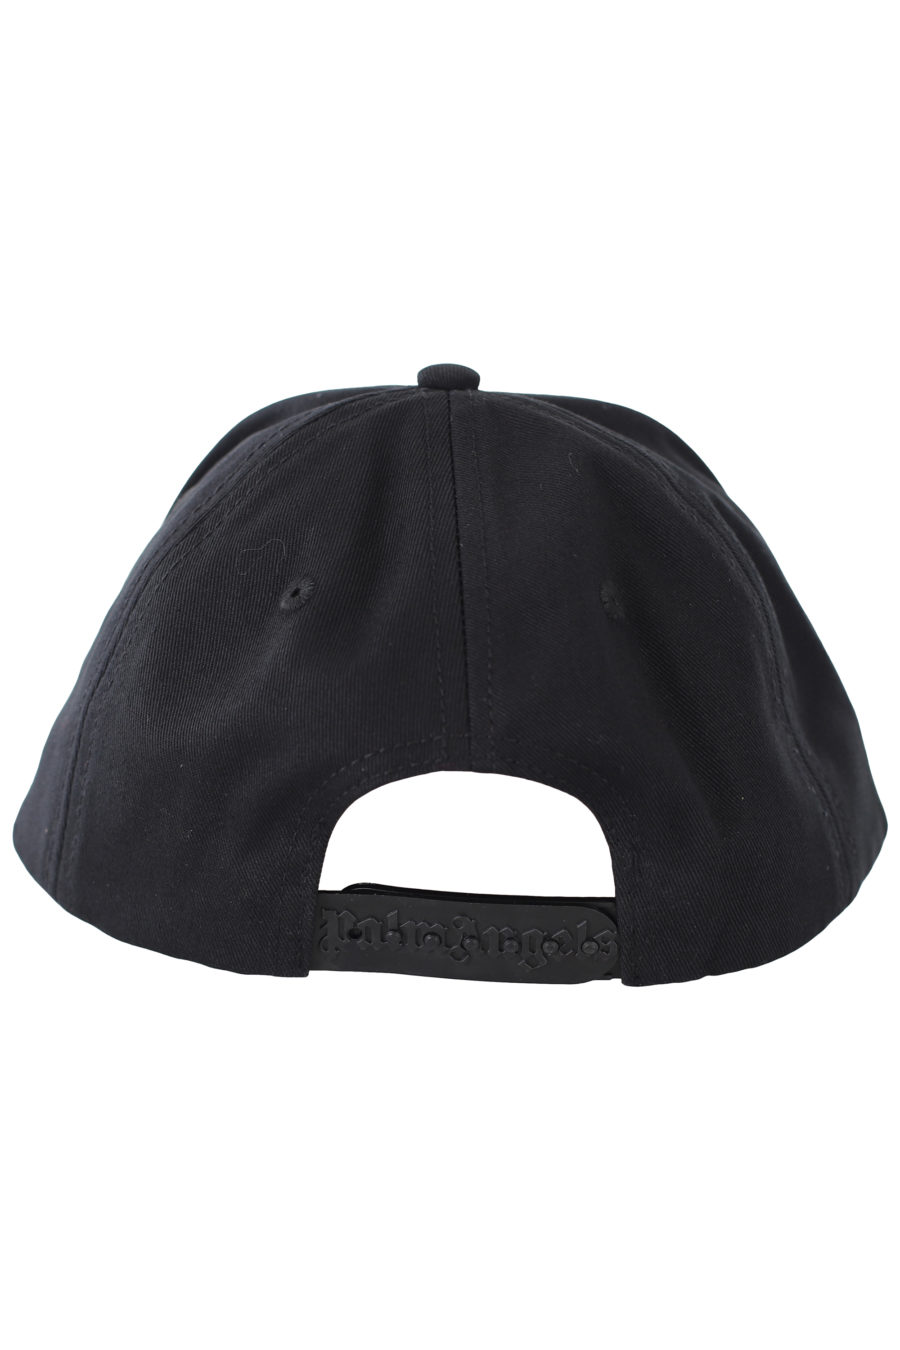 Black cap with small embossed logo - IMG 9390